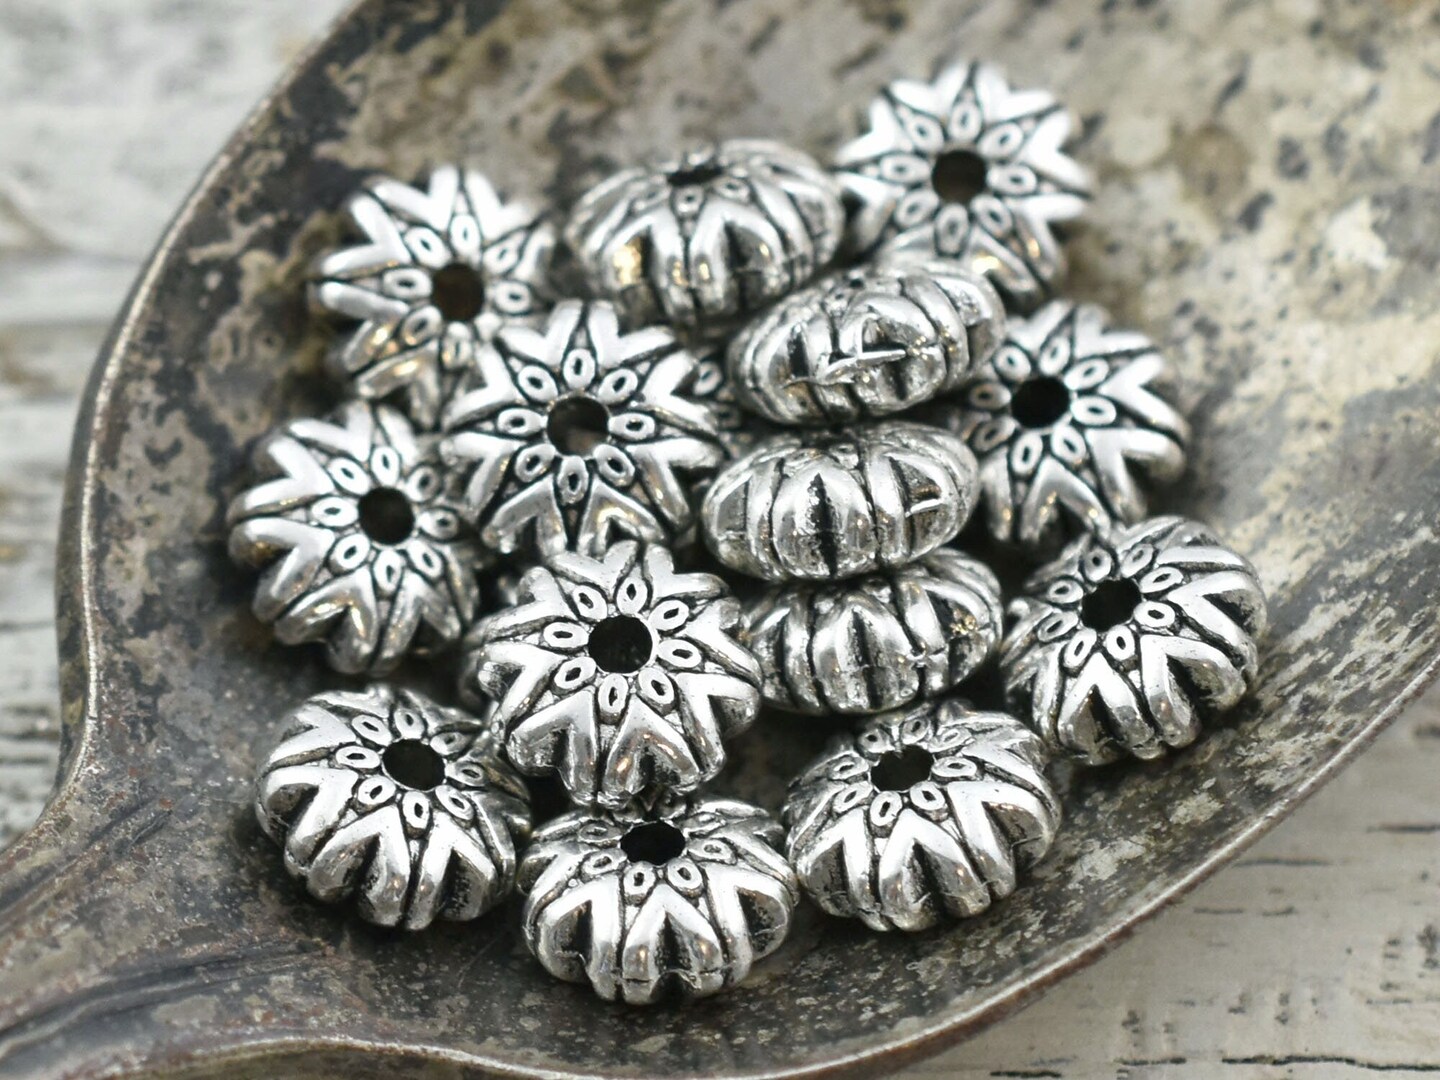 *25* 5x10mm Antique Silver Rondelle Star Spacer Beads